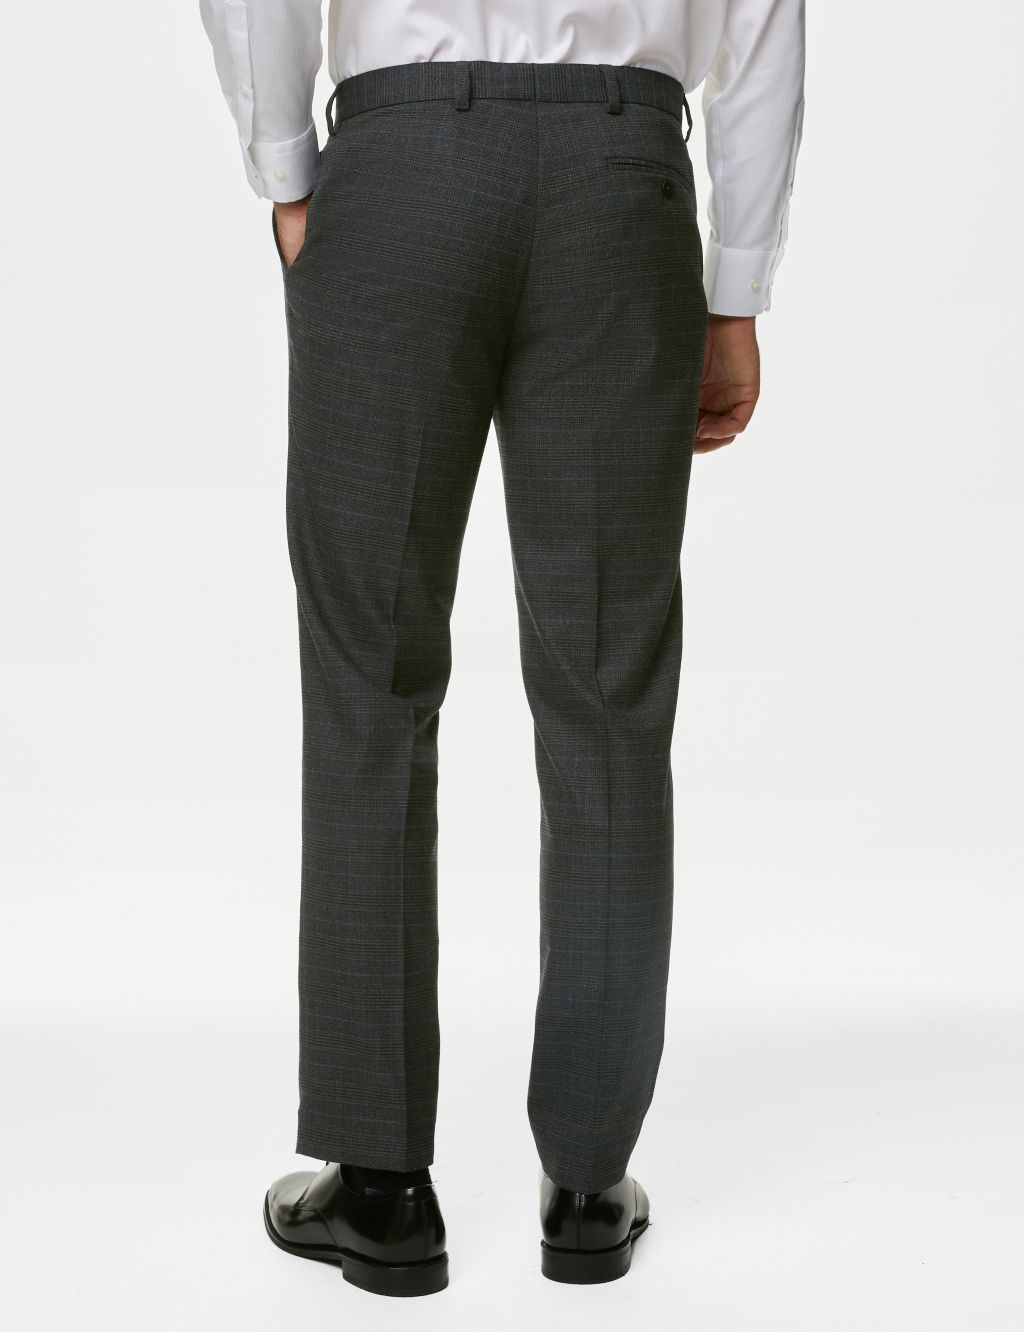 Slim Fit Prince of Wales Check Suit image 5